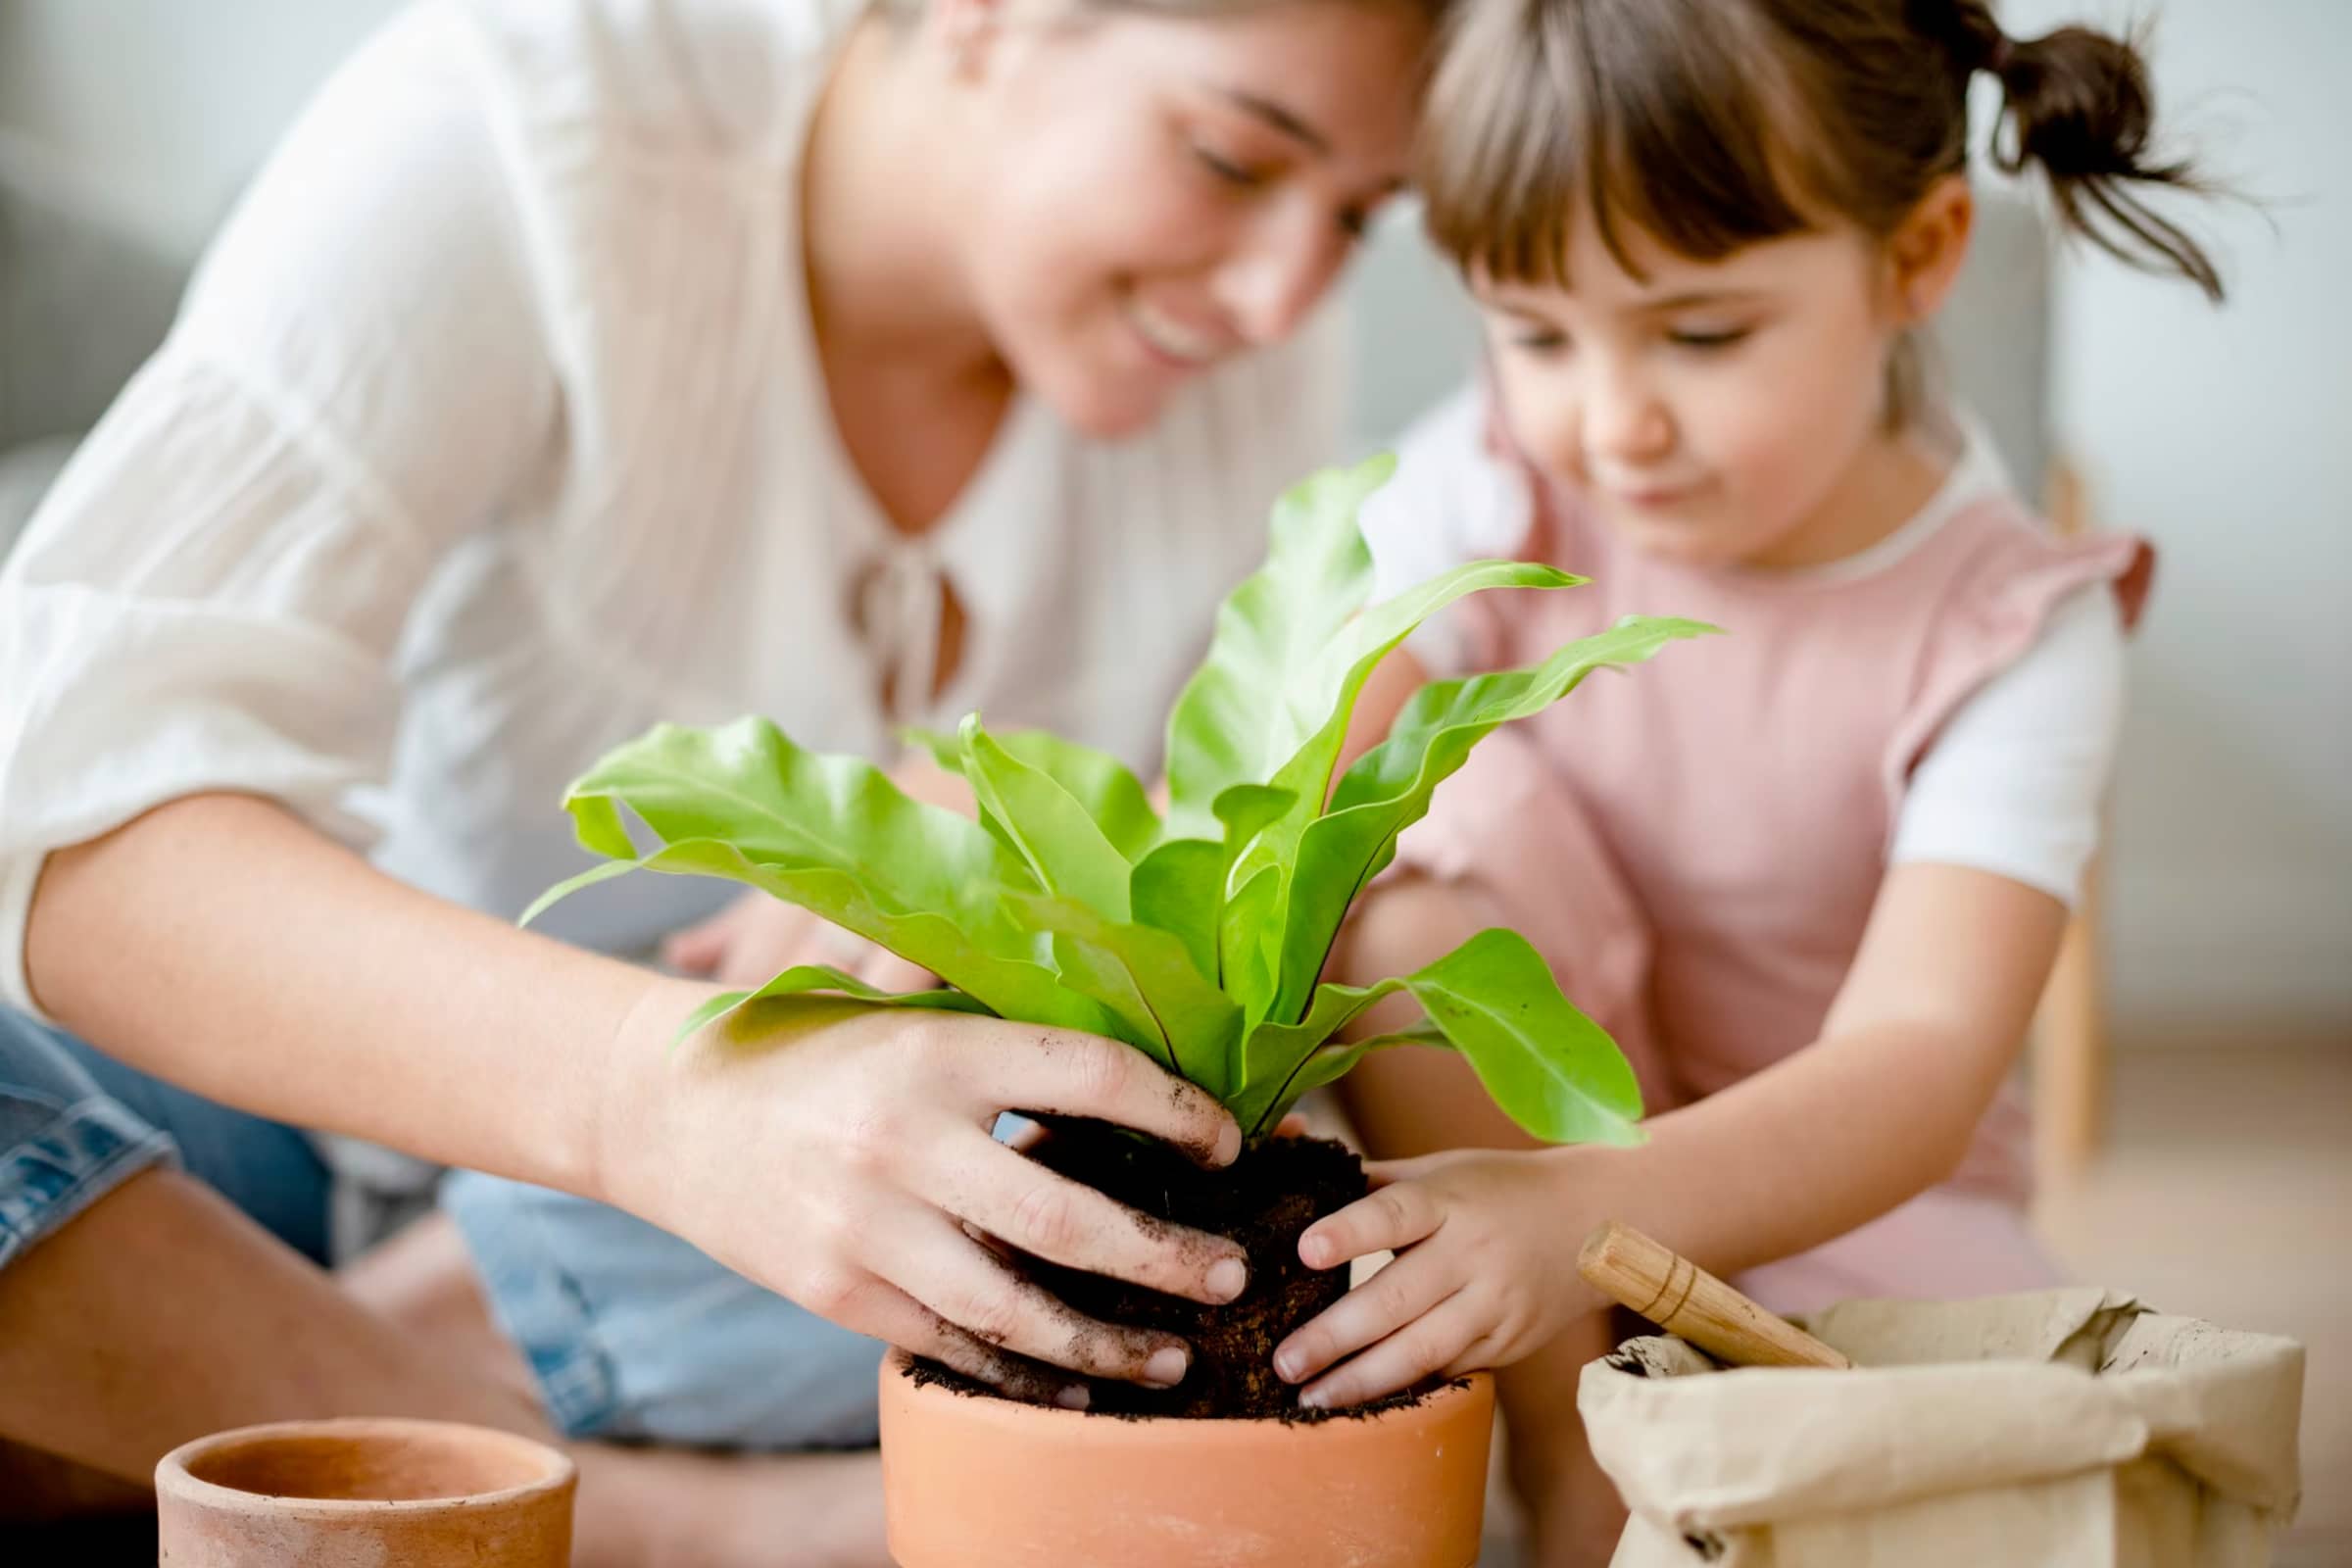 How to Teach Your Kids to Care for Their Own House Plants - Leaf Culture